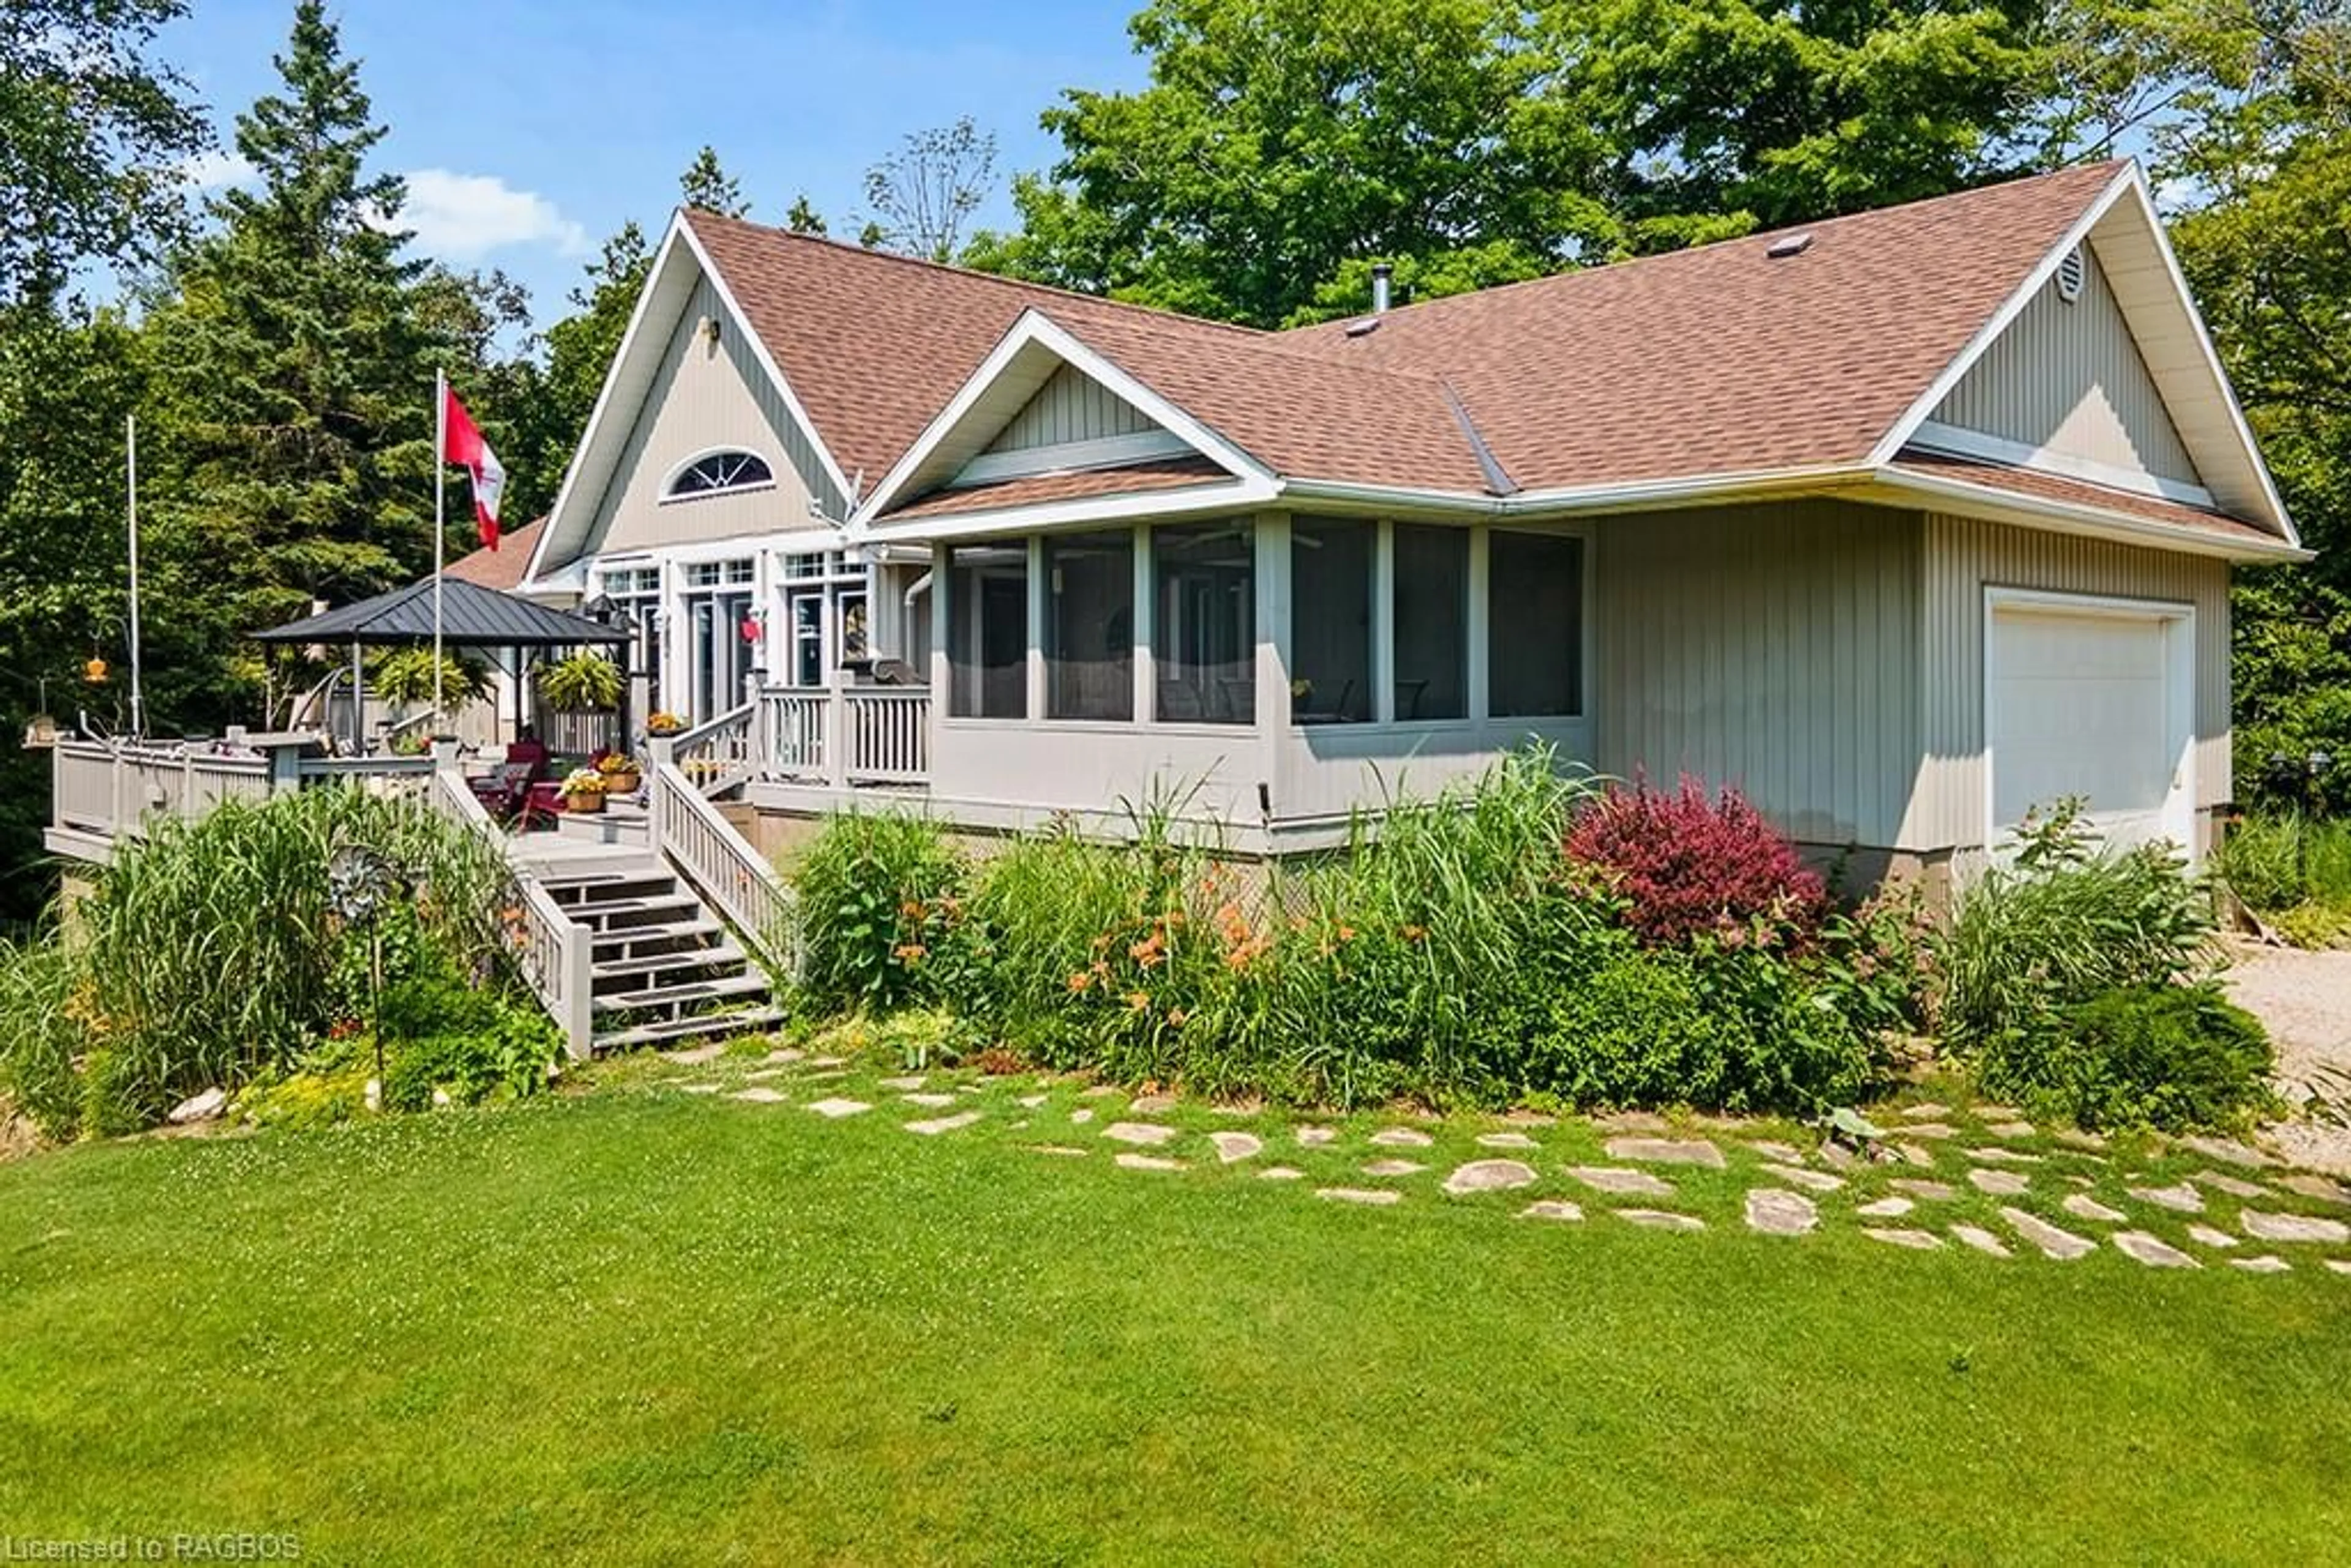 Cottage for 55 Trillium Cross, Lions Head Ontario N0H 1W0